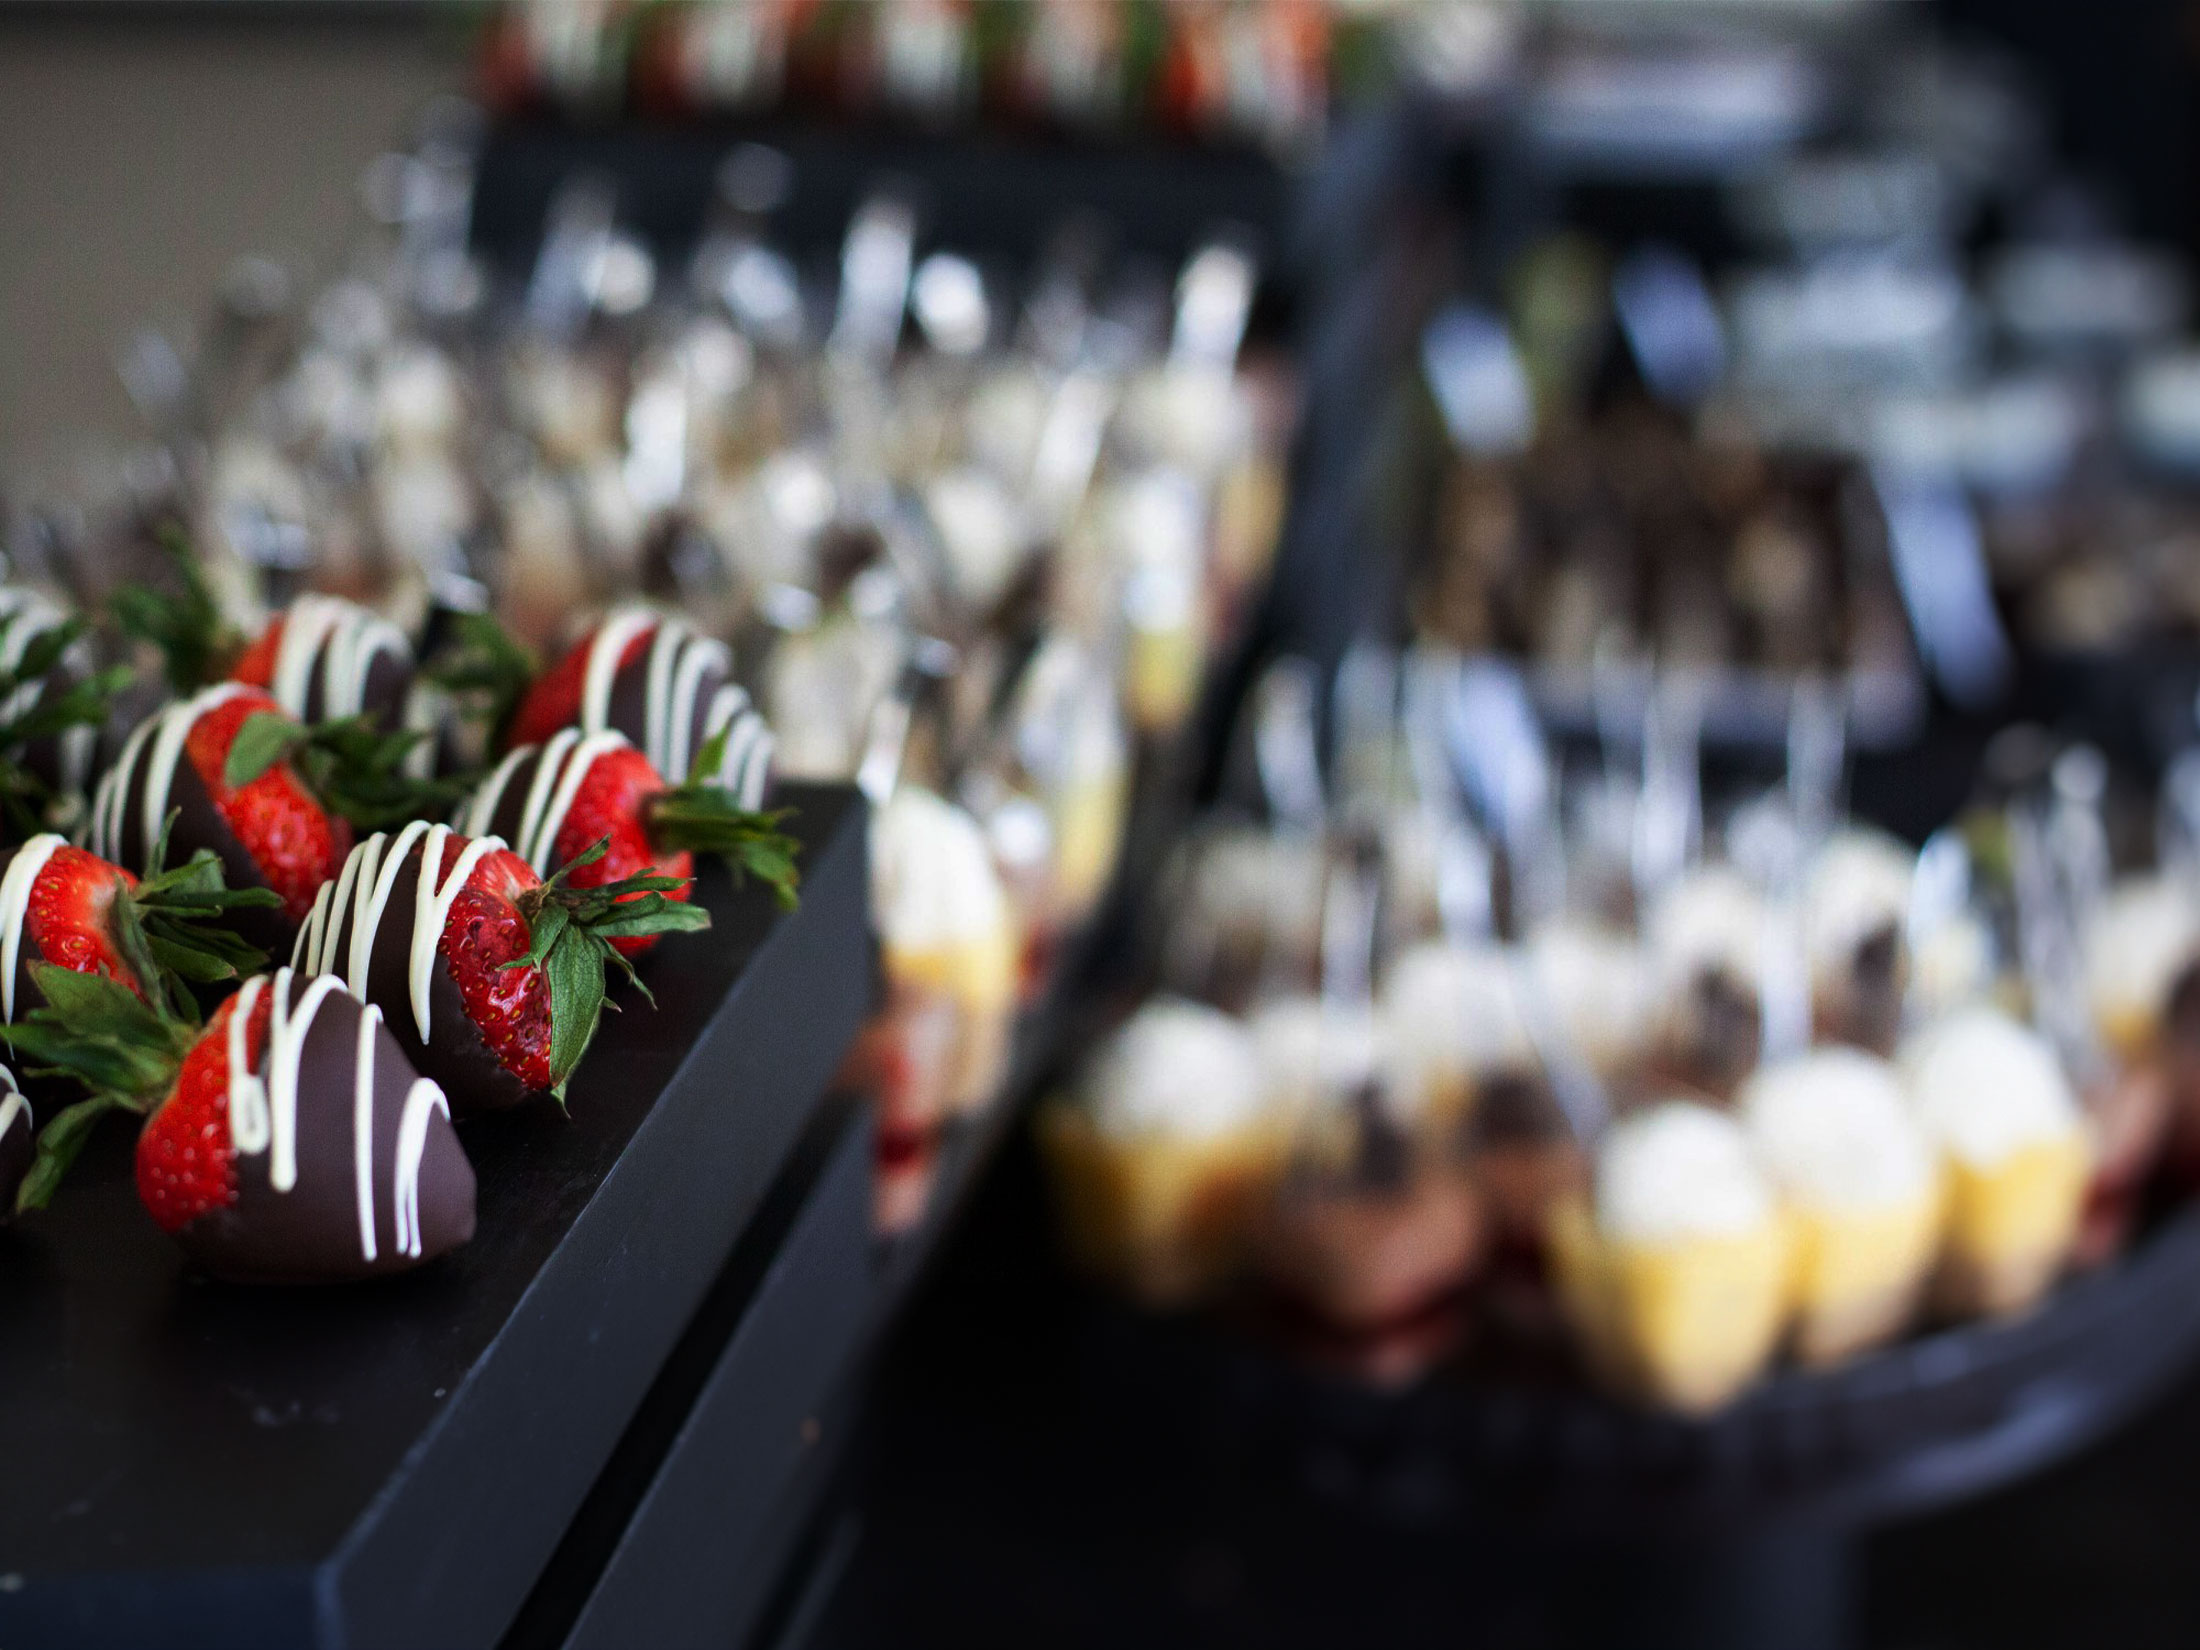 Chocolate-covered strawberries on a display.